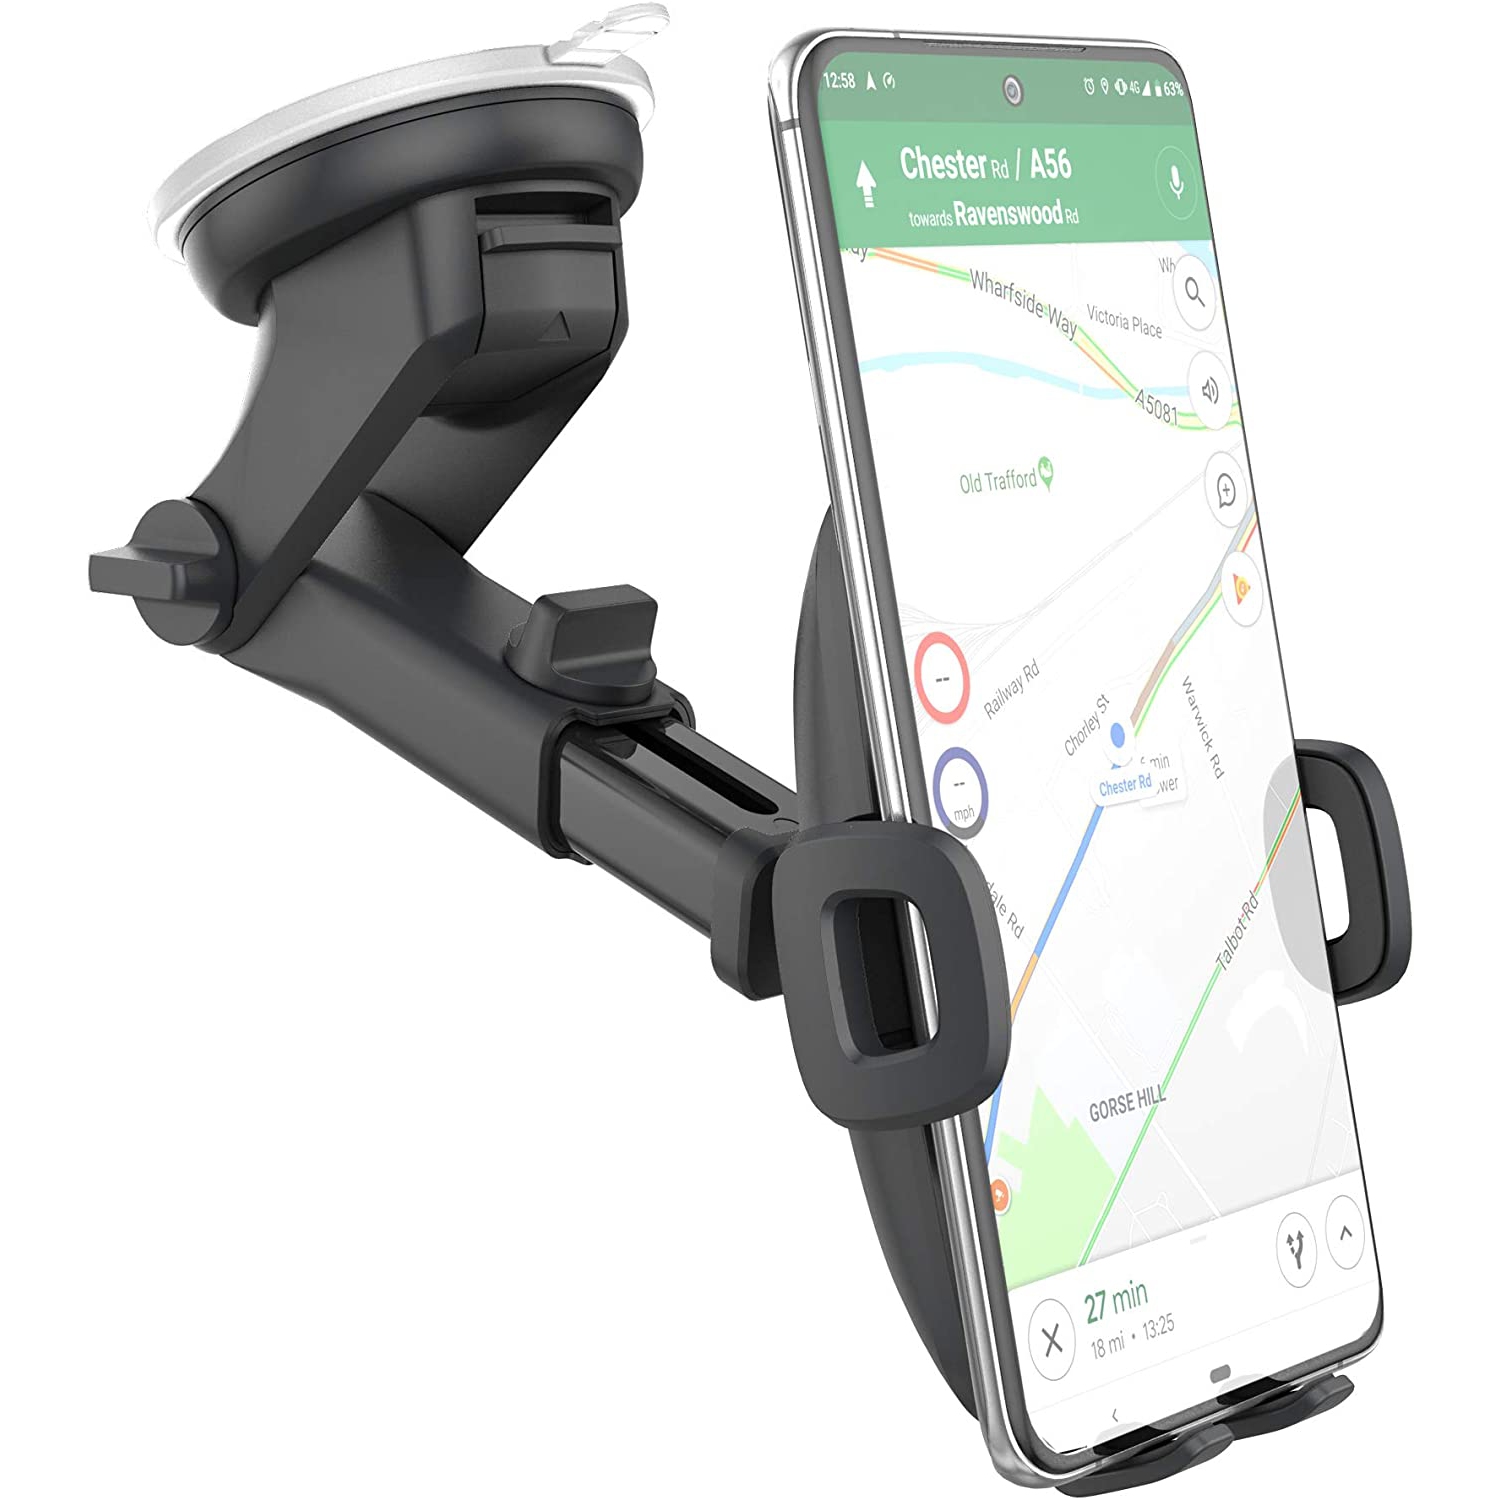 Samsung Galaxy Car Phone Holder (Windshield/Dashboard) Case Friendly Mount for S8/S9/S10/S10e/Plus/S20/S21/ S22 Ultra/Note 10/20